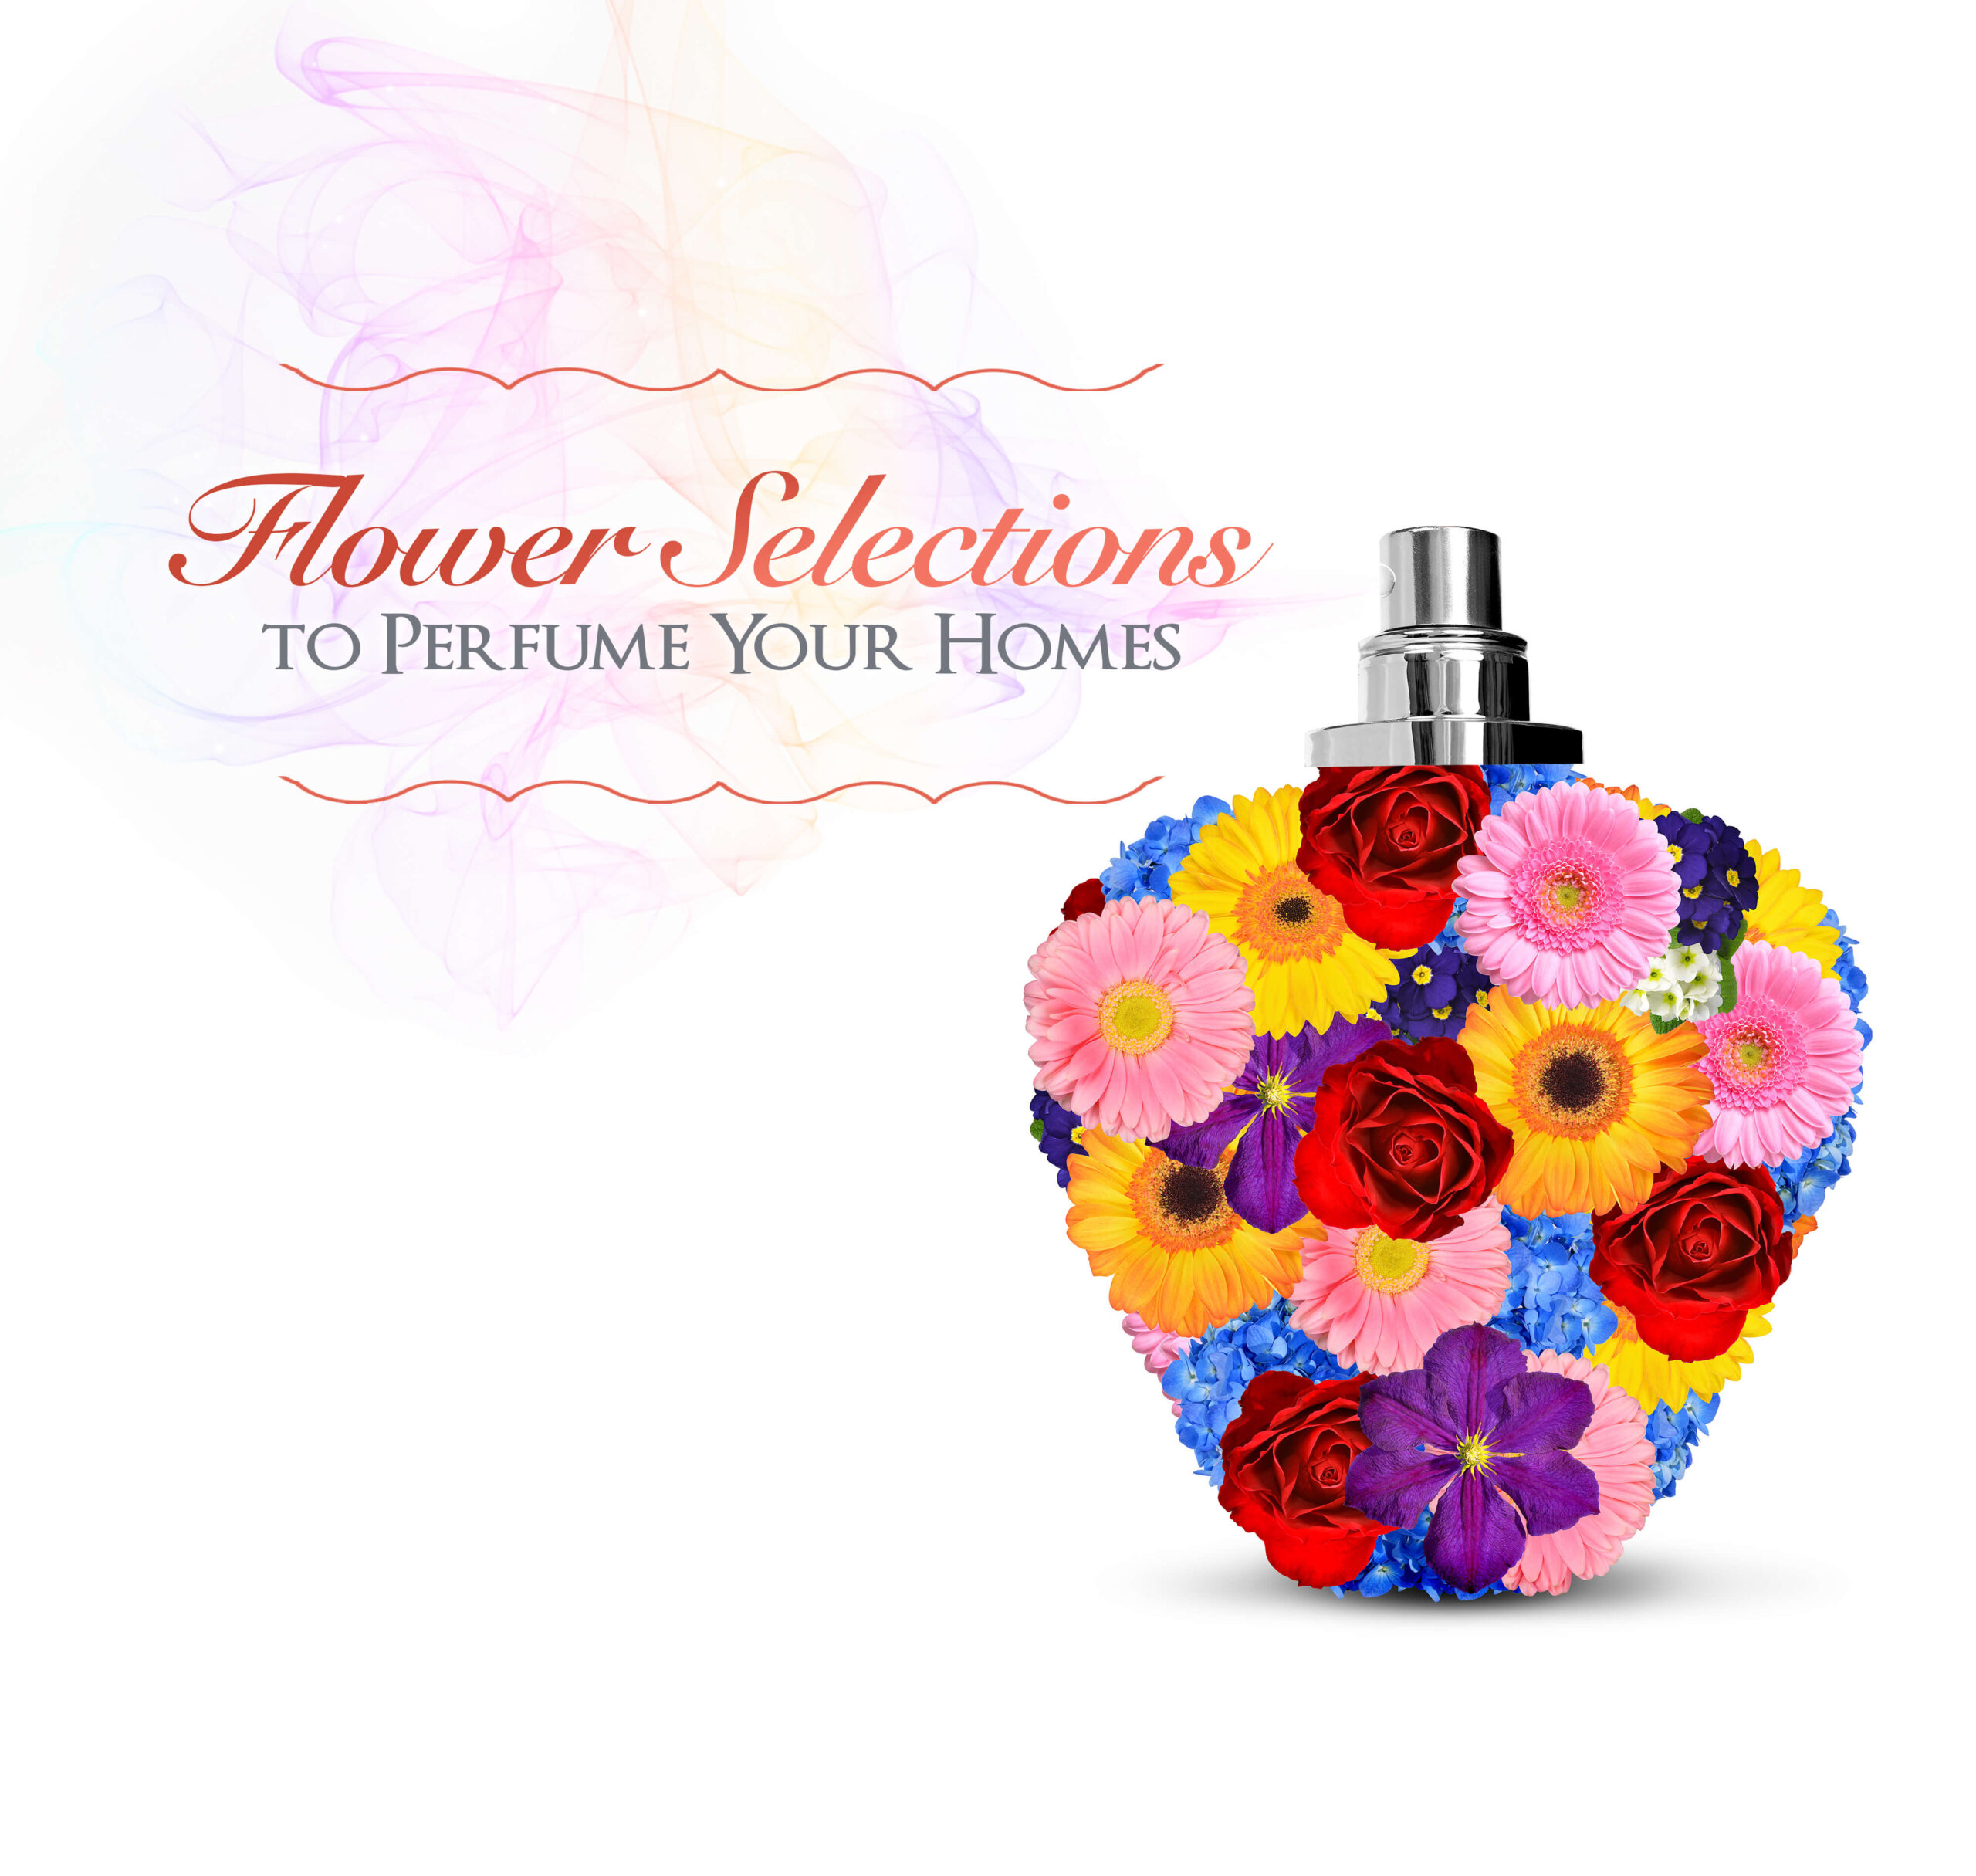 Fragrant Flowers to Perfume Your Homes